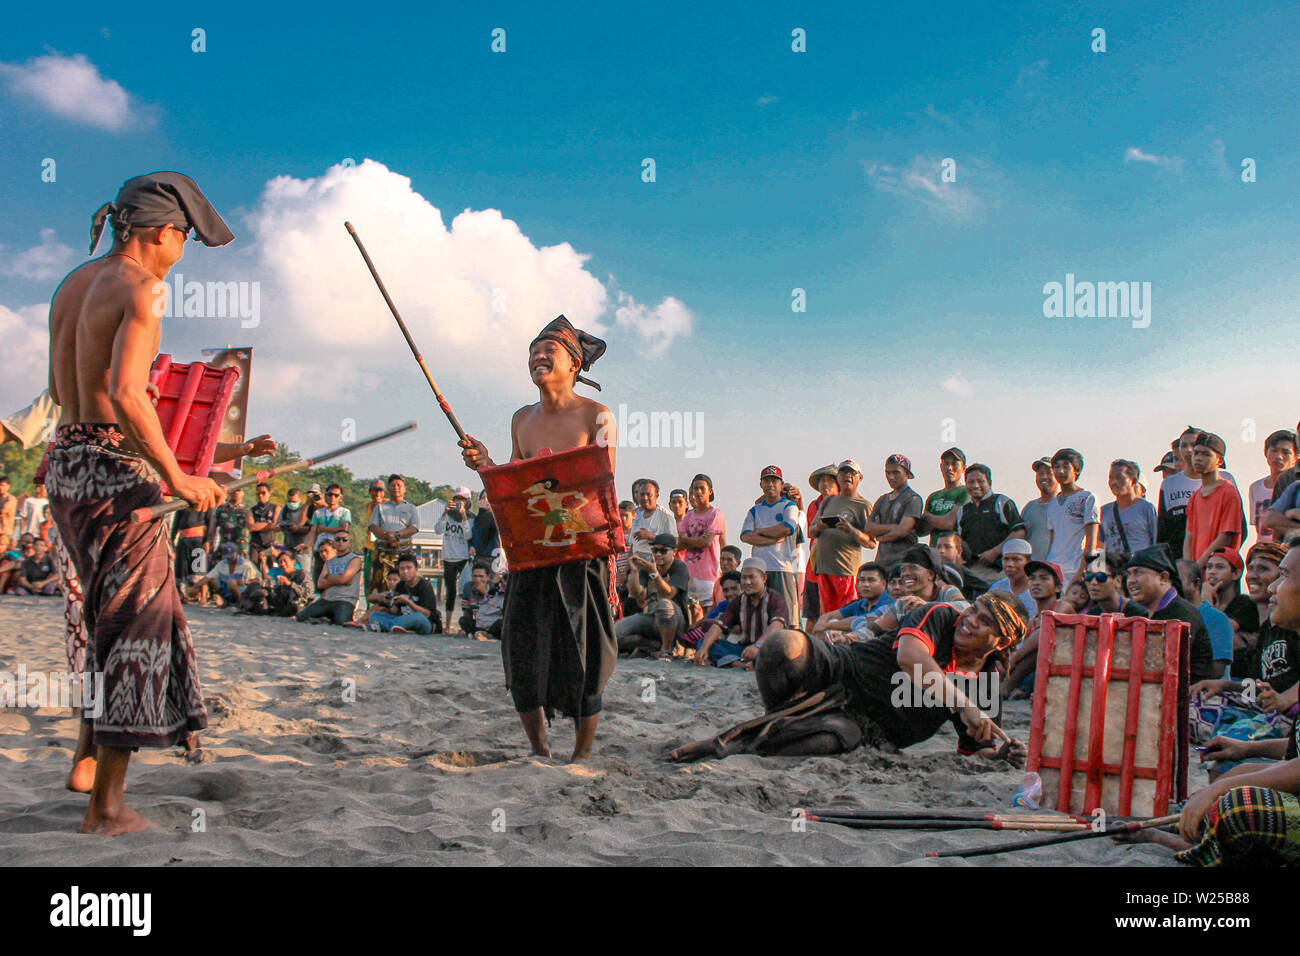 Peserean, one of the Sasak culture in Lombok, Indonesia. Stock Photo